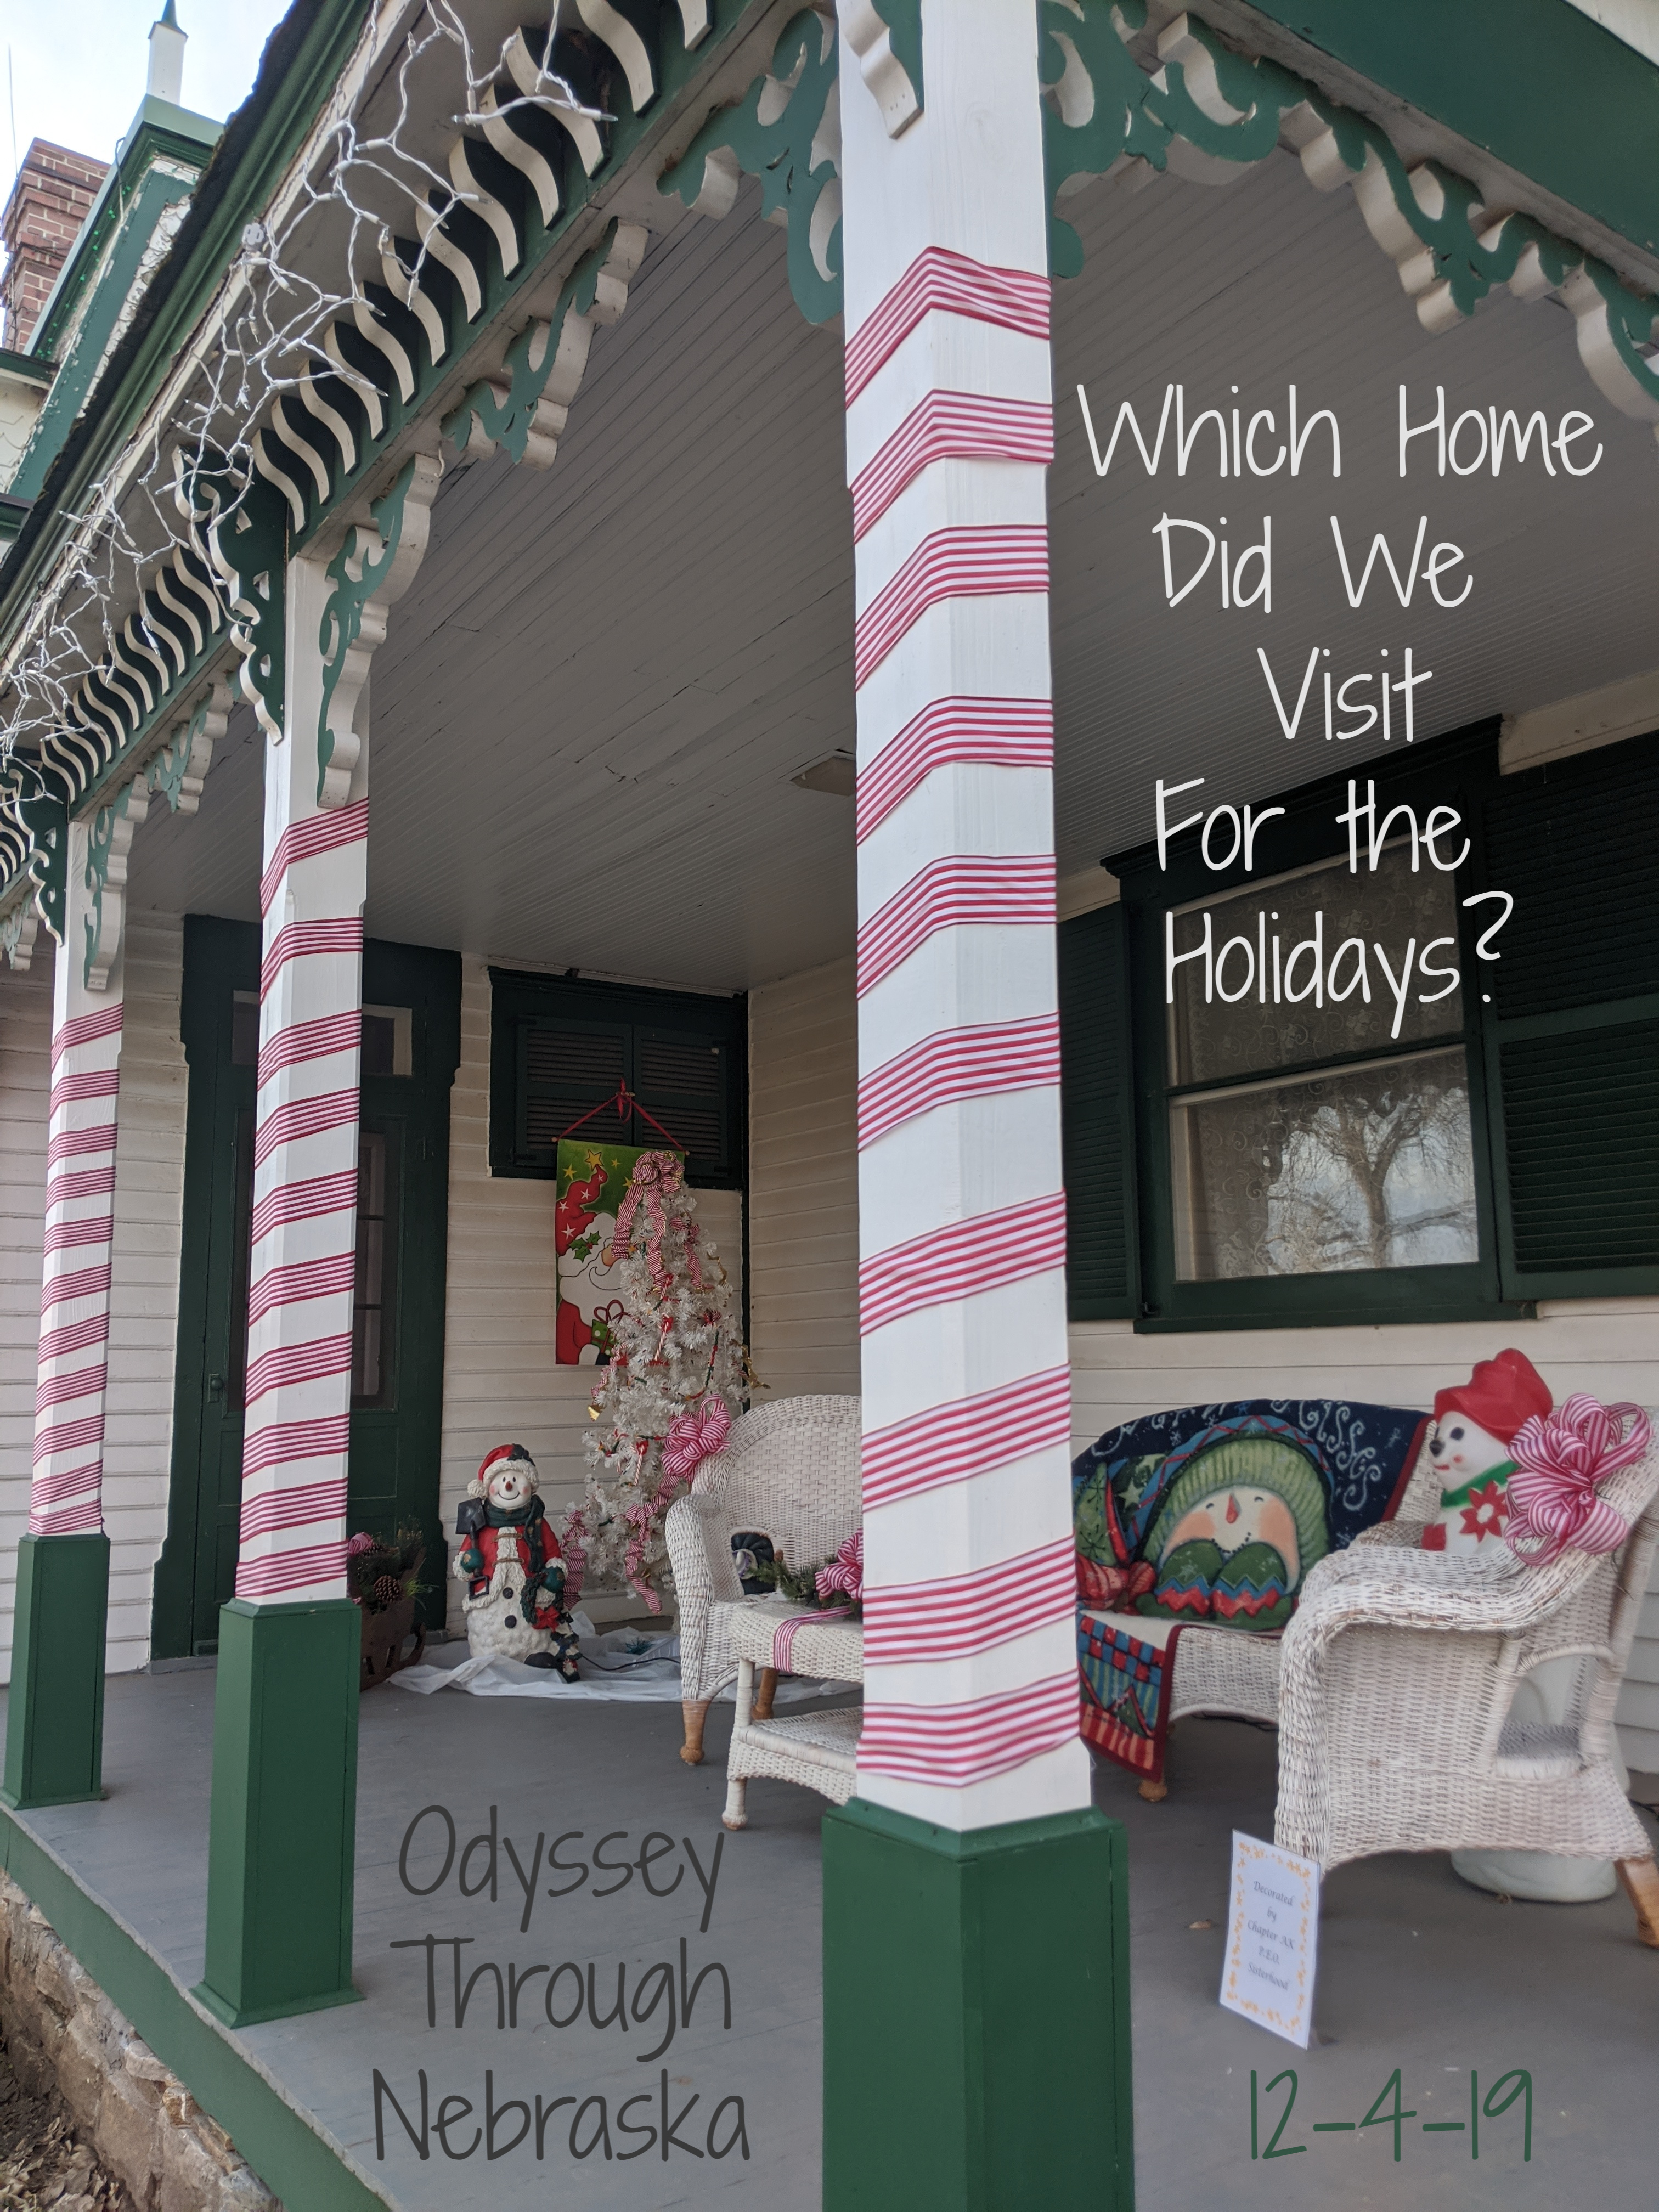 Which home for the holidays 12-4-19